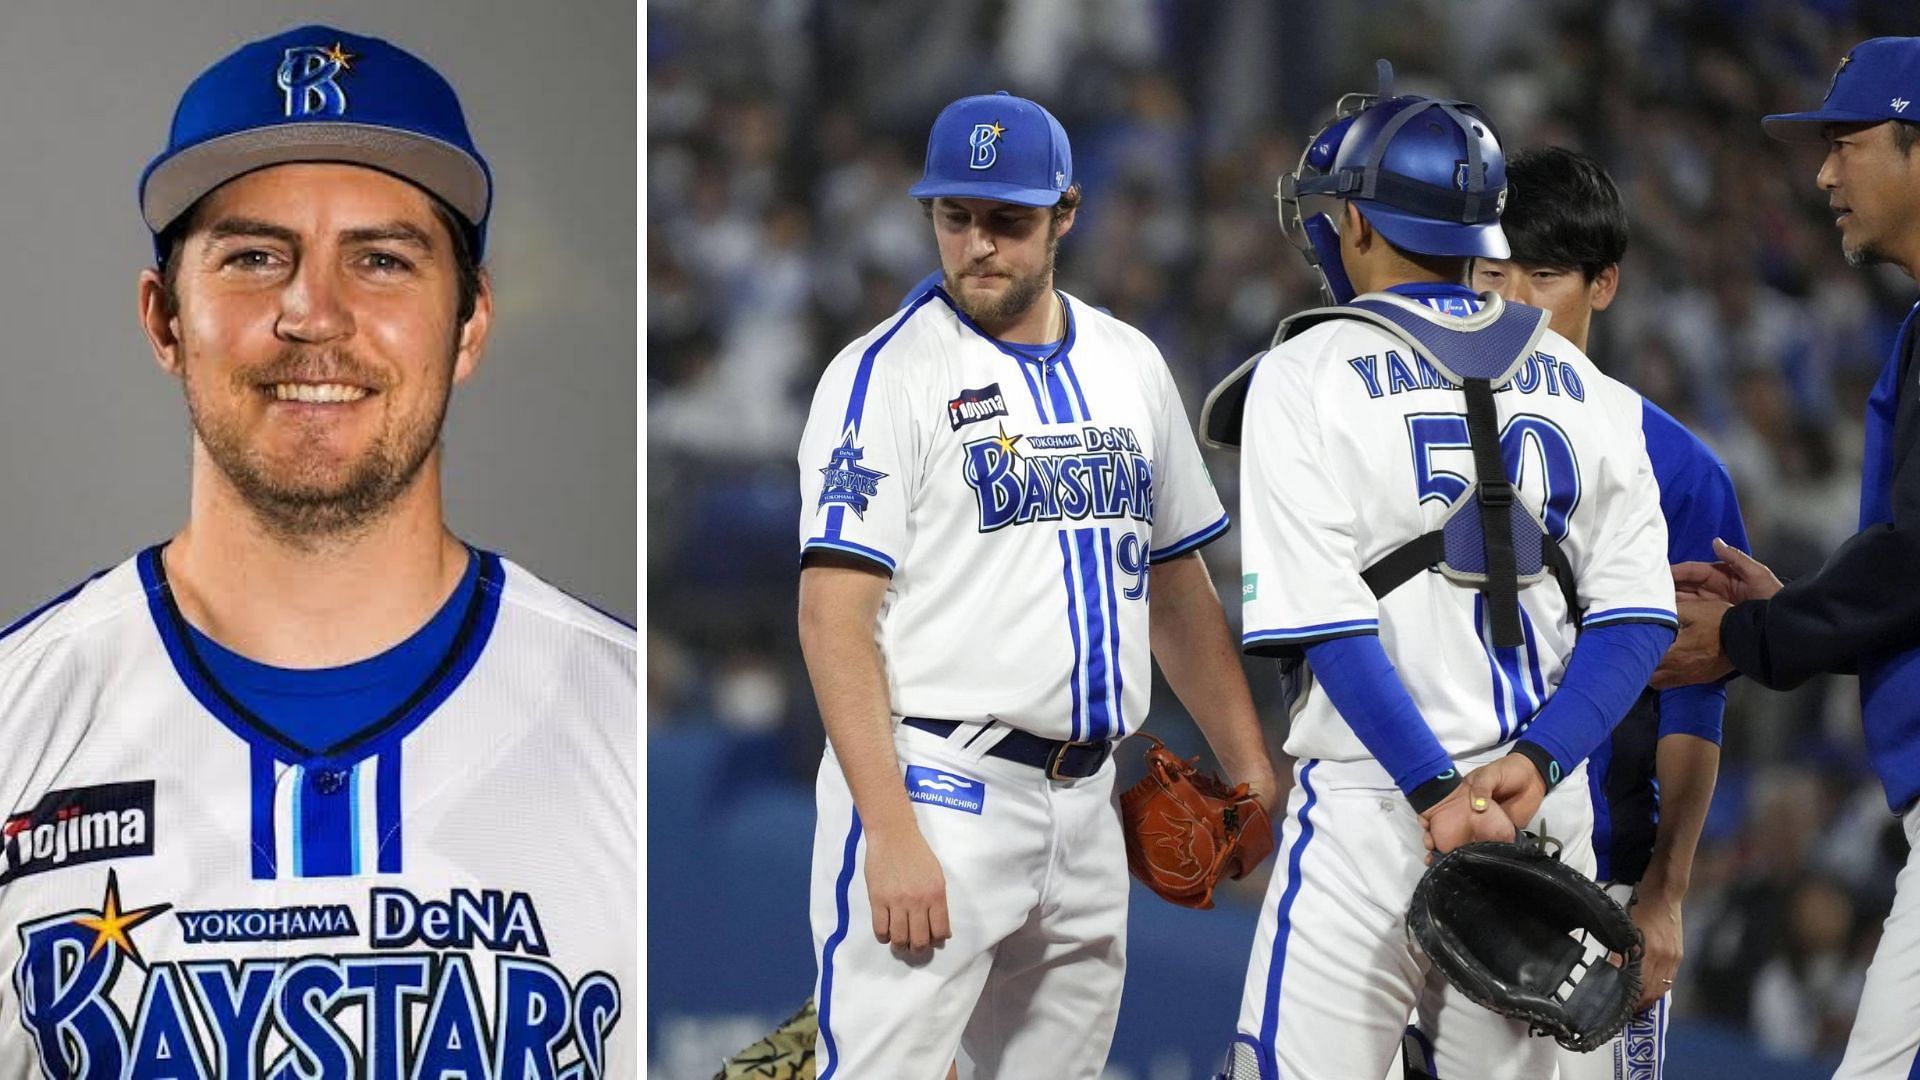 MLB fans mock Cy Young pitcher Trevor Bauer after decision to sign with  Yokohama backfires: Dude got yeeted into the minor leagues in Japan